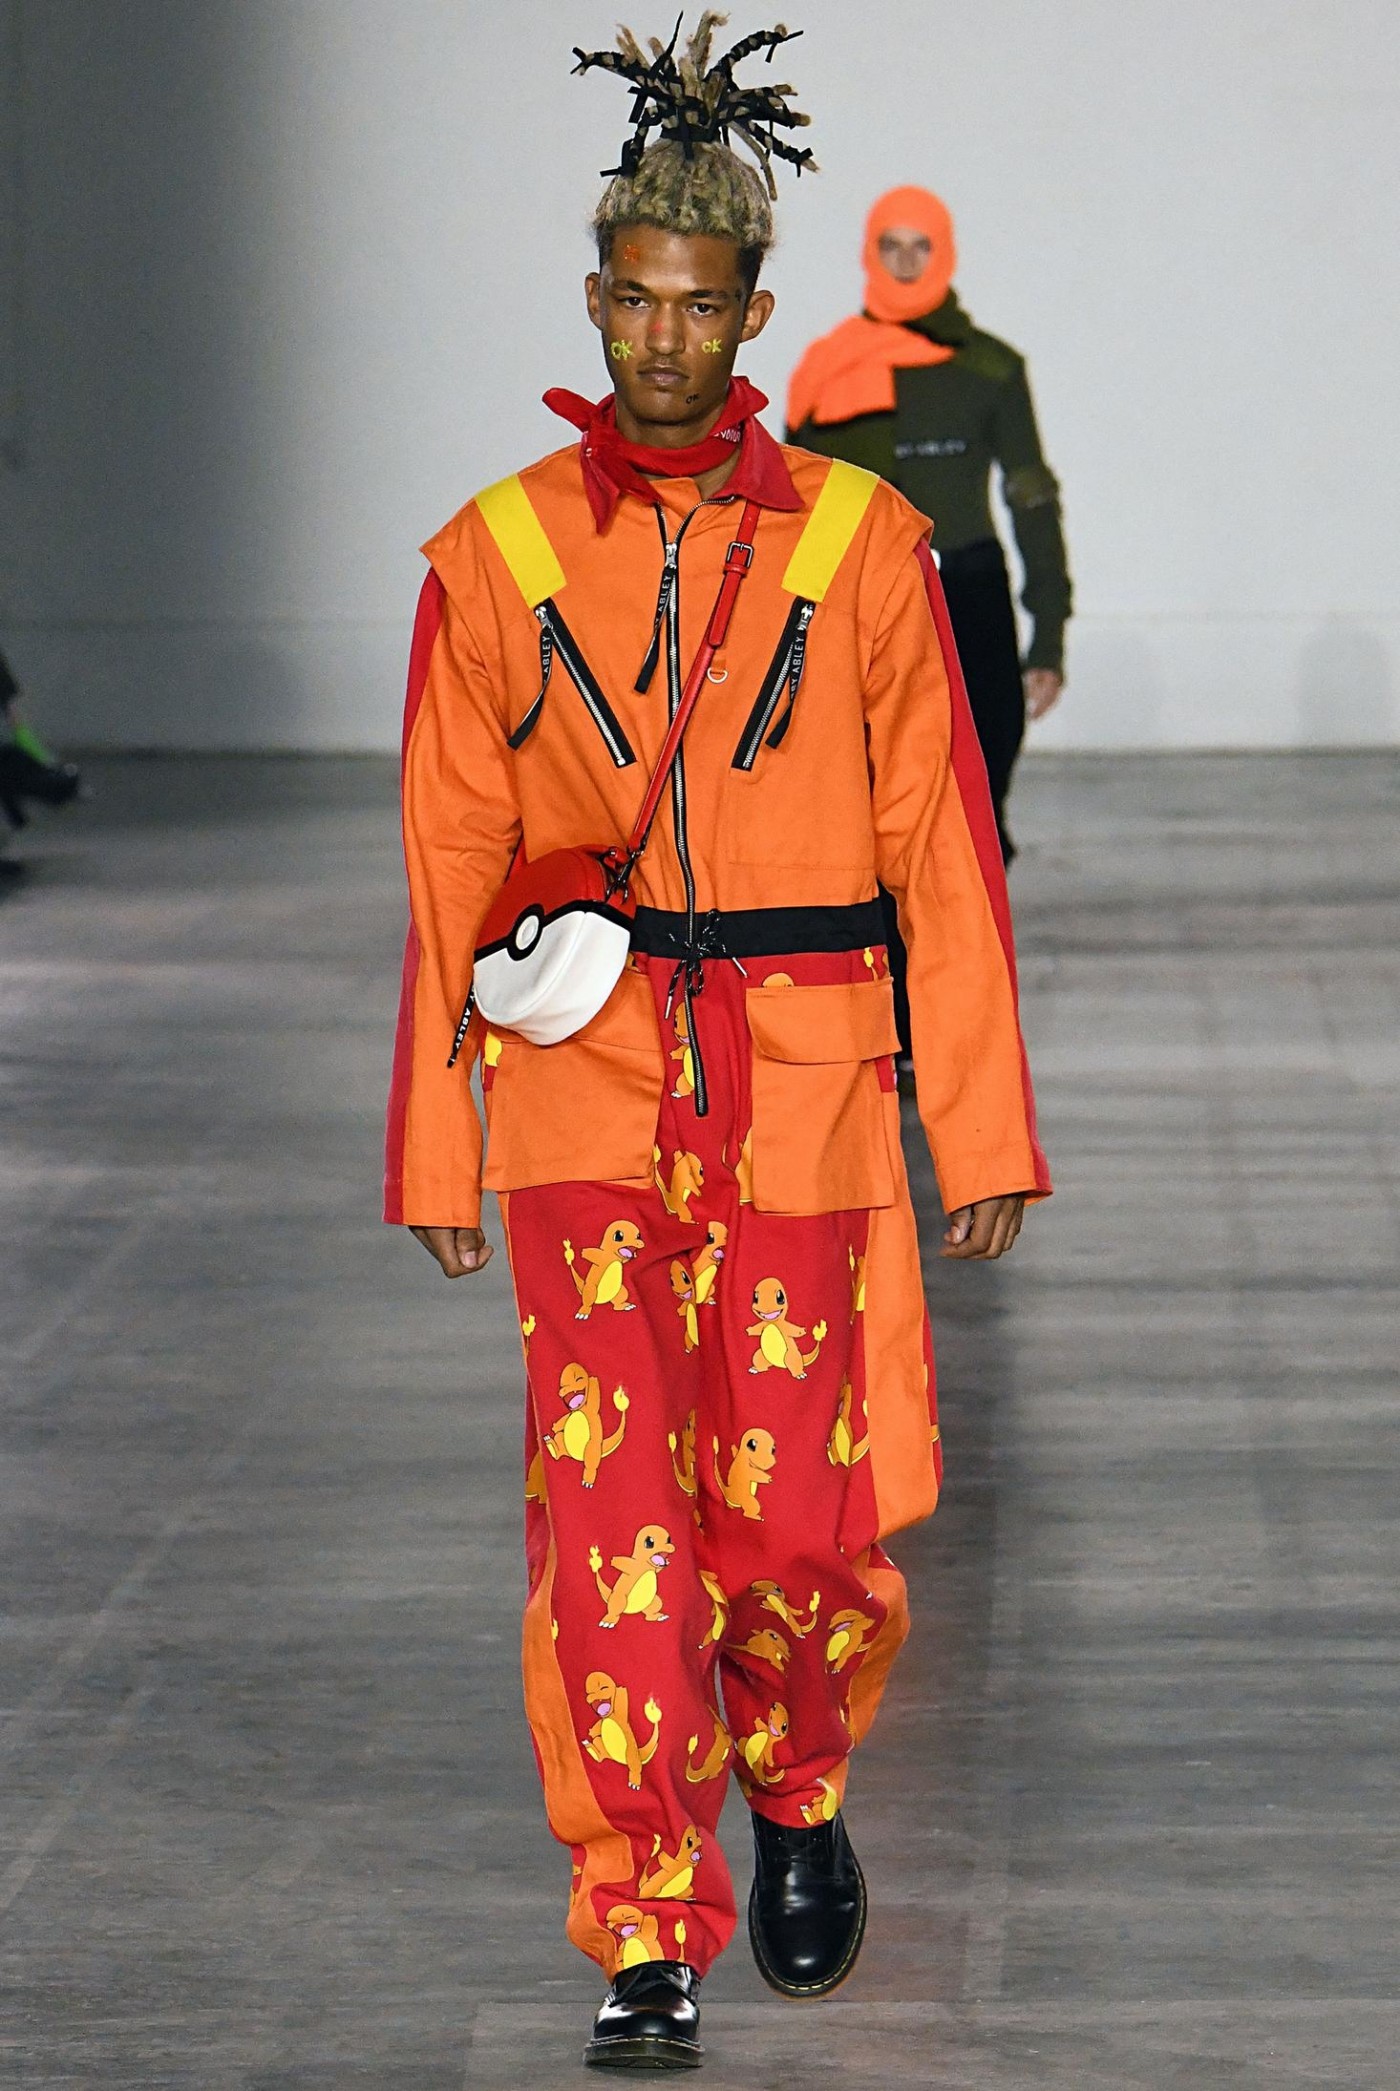 Six dominant trends from Men’s Fashion Week 2019 | EDITED